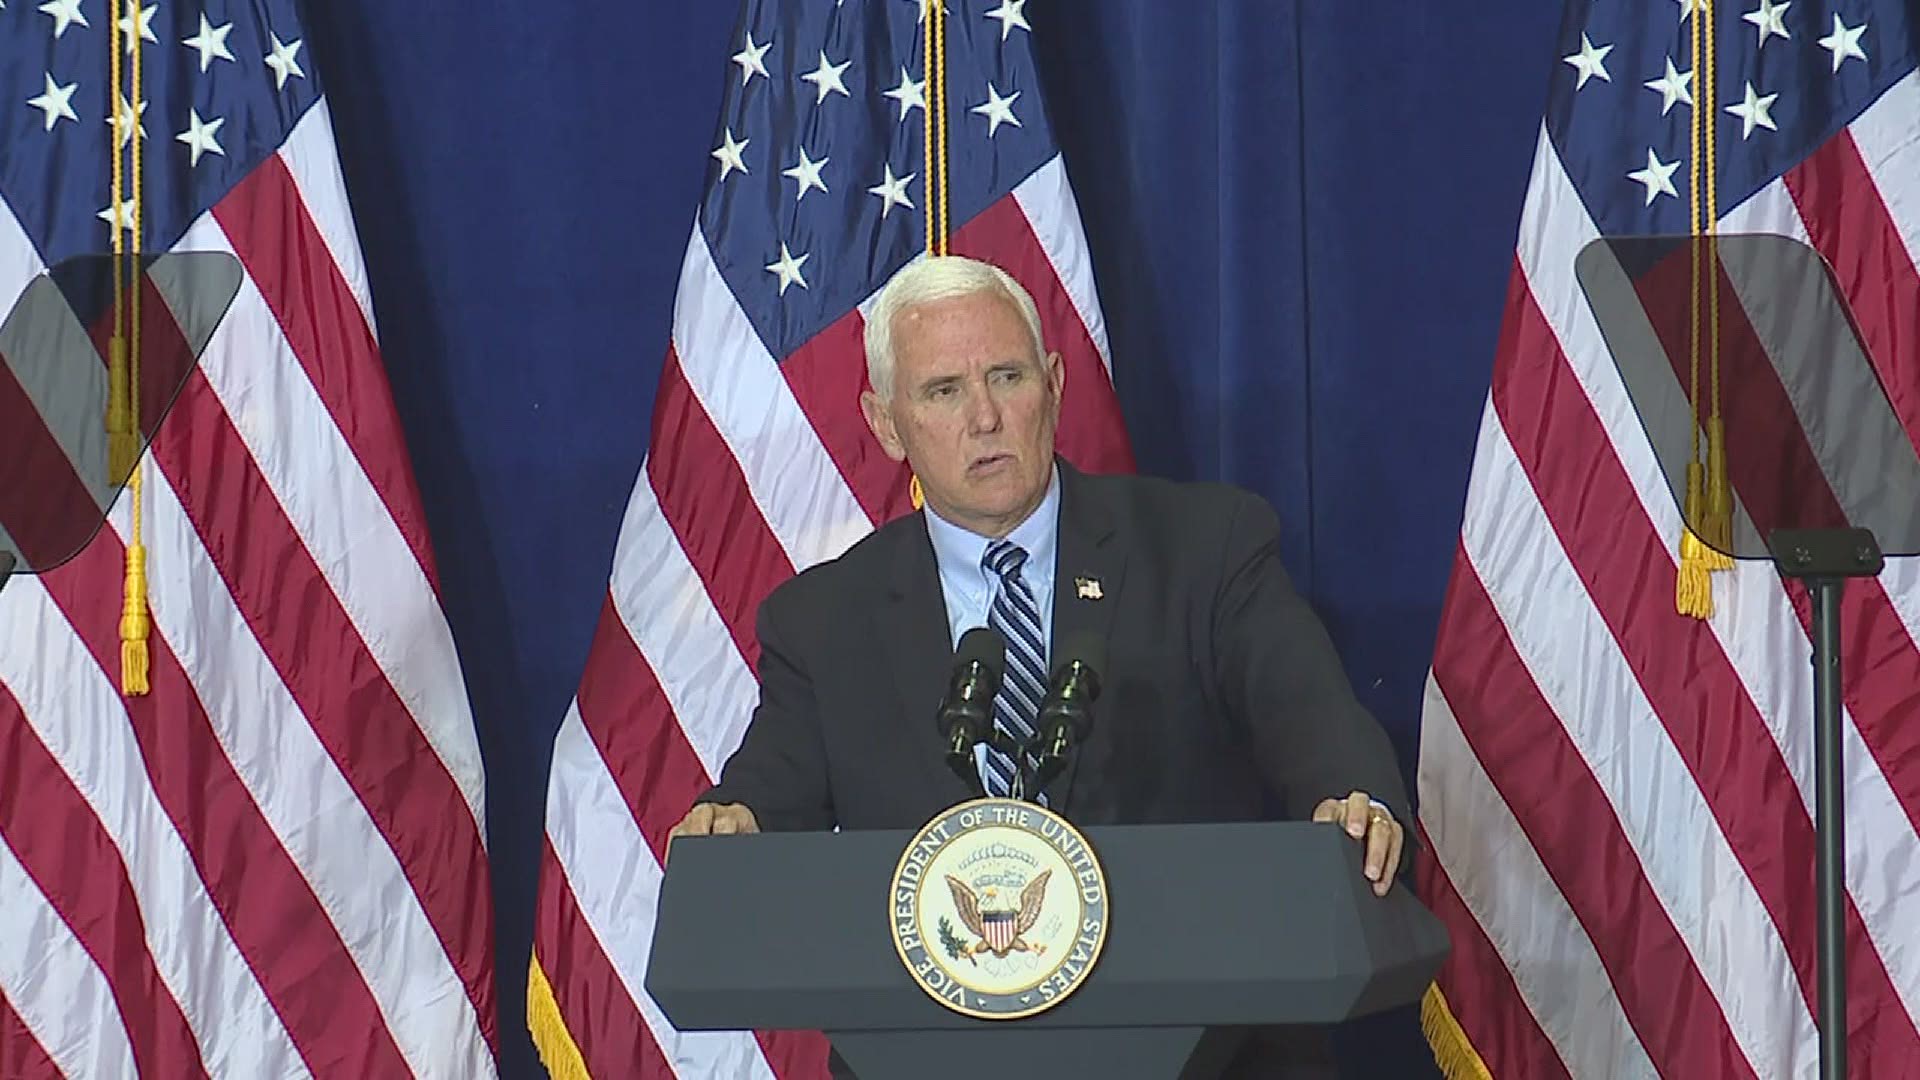 With 15 days until the election, the Vice President focused on making sure Pennsylvania voters cast their ballots.